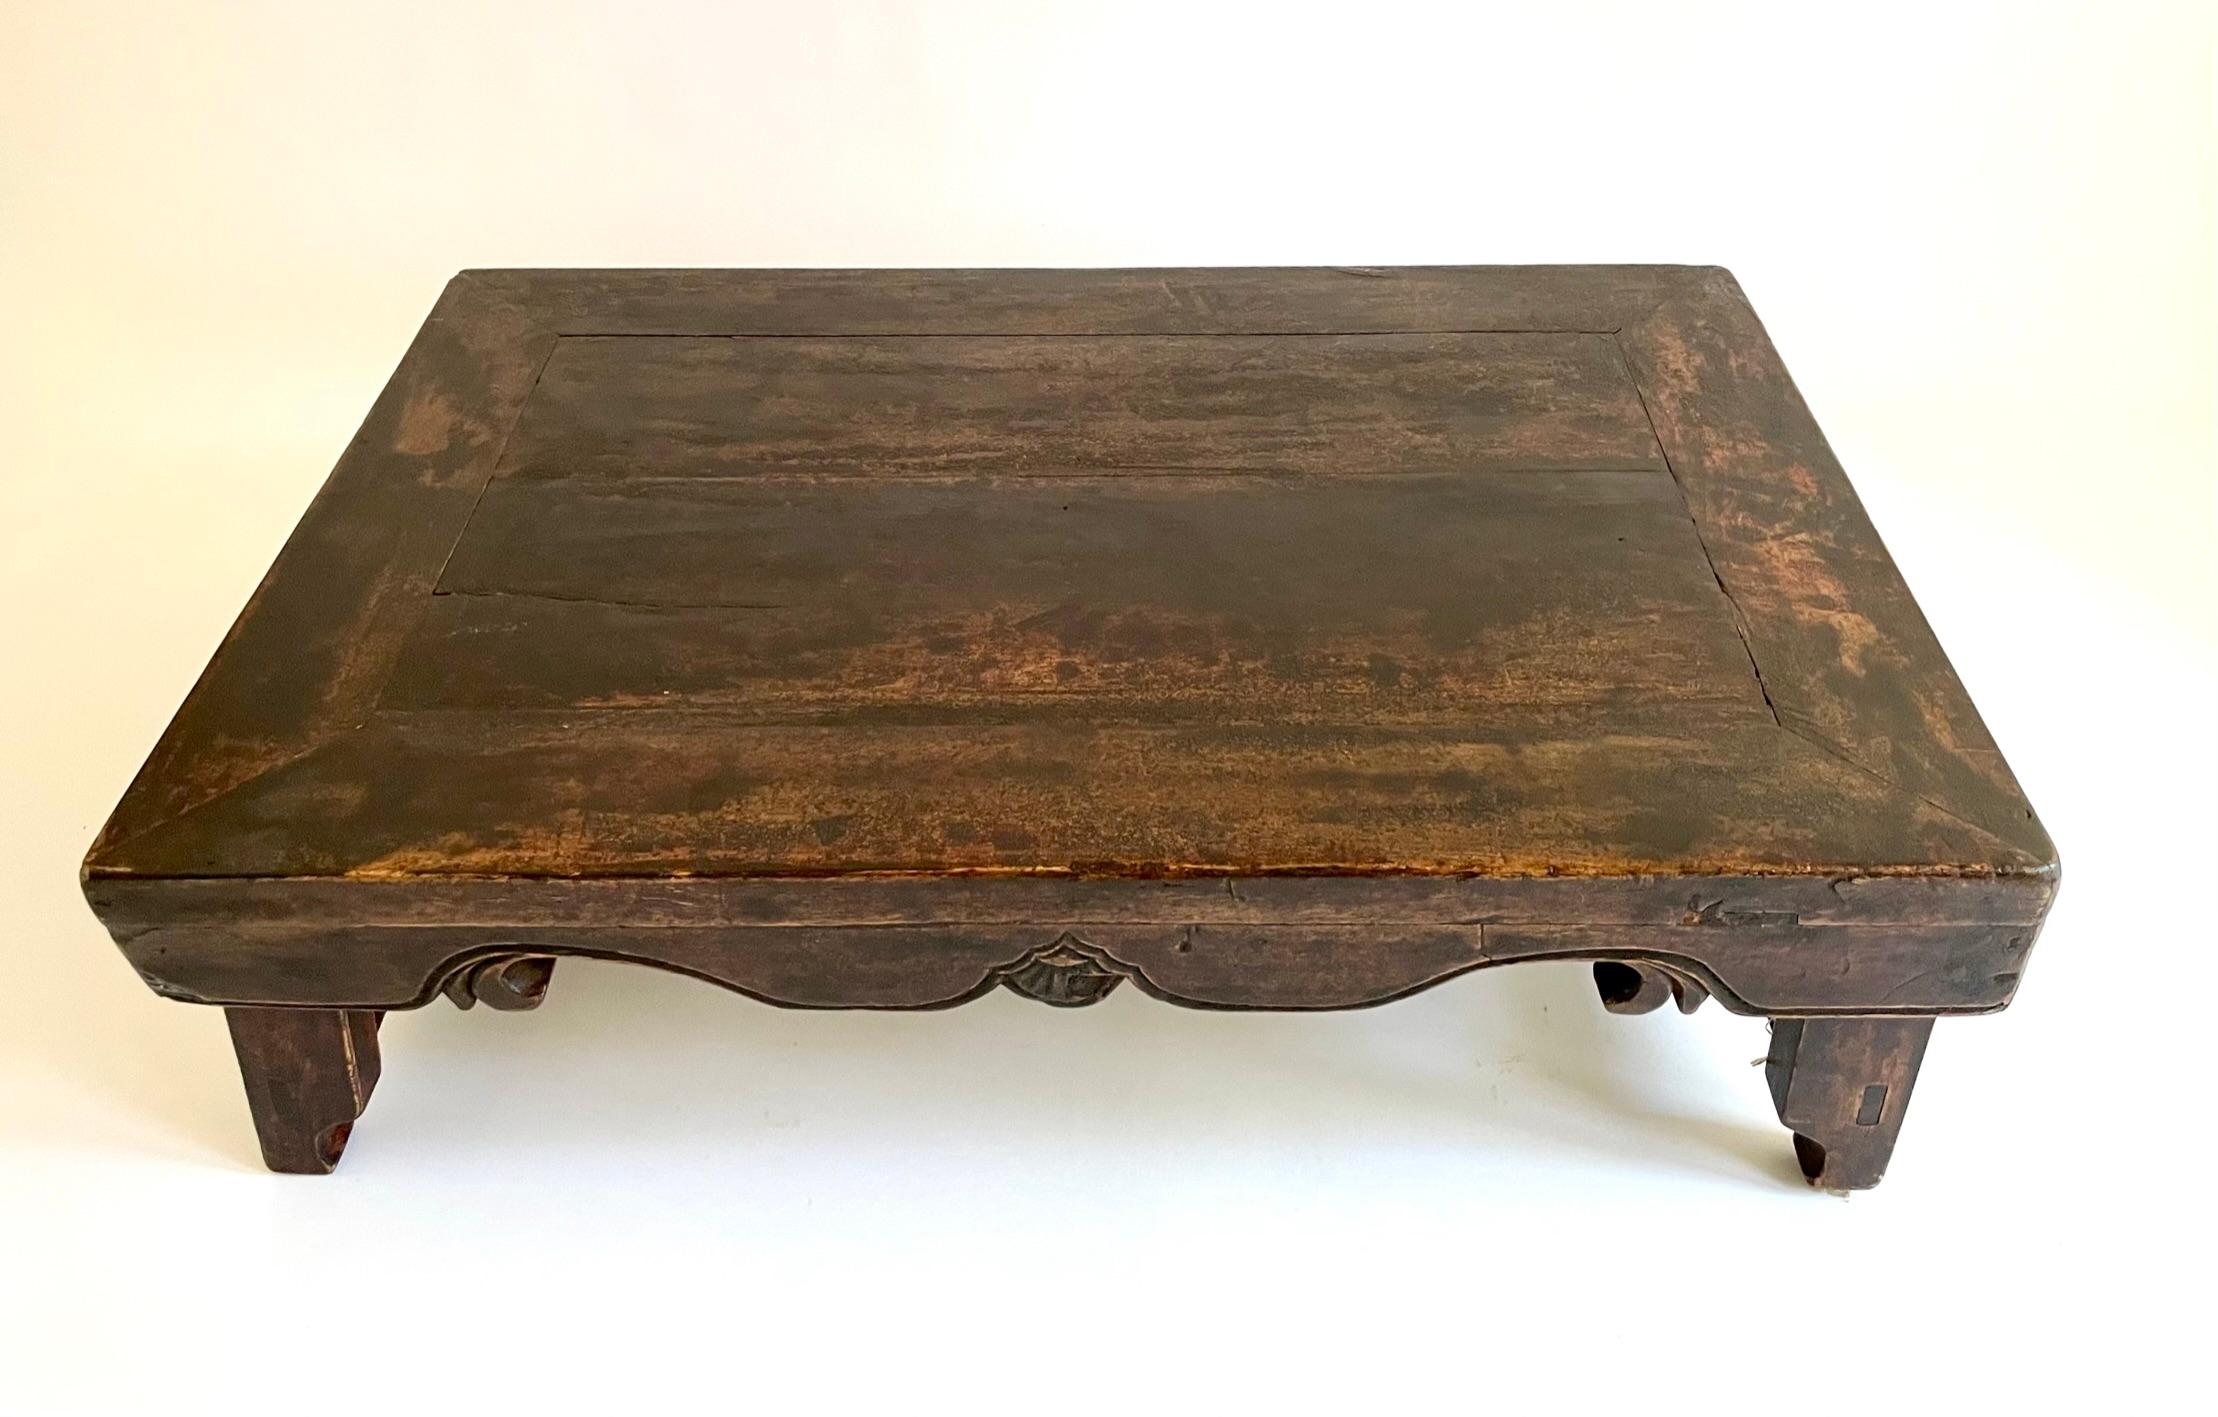 Hand-Carved Rare 19th Century Chinese Folding Low Table 'Kang Table' For Sale